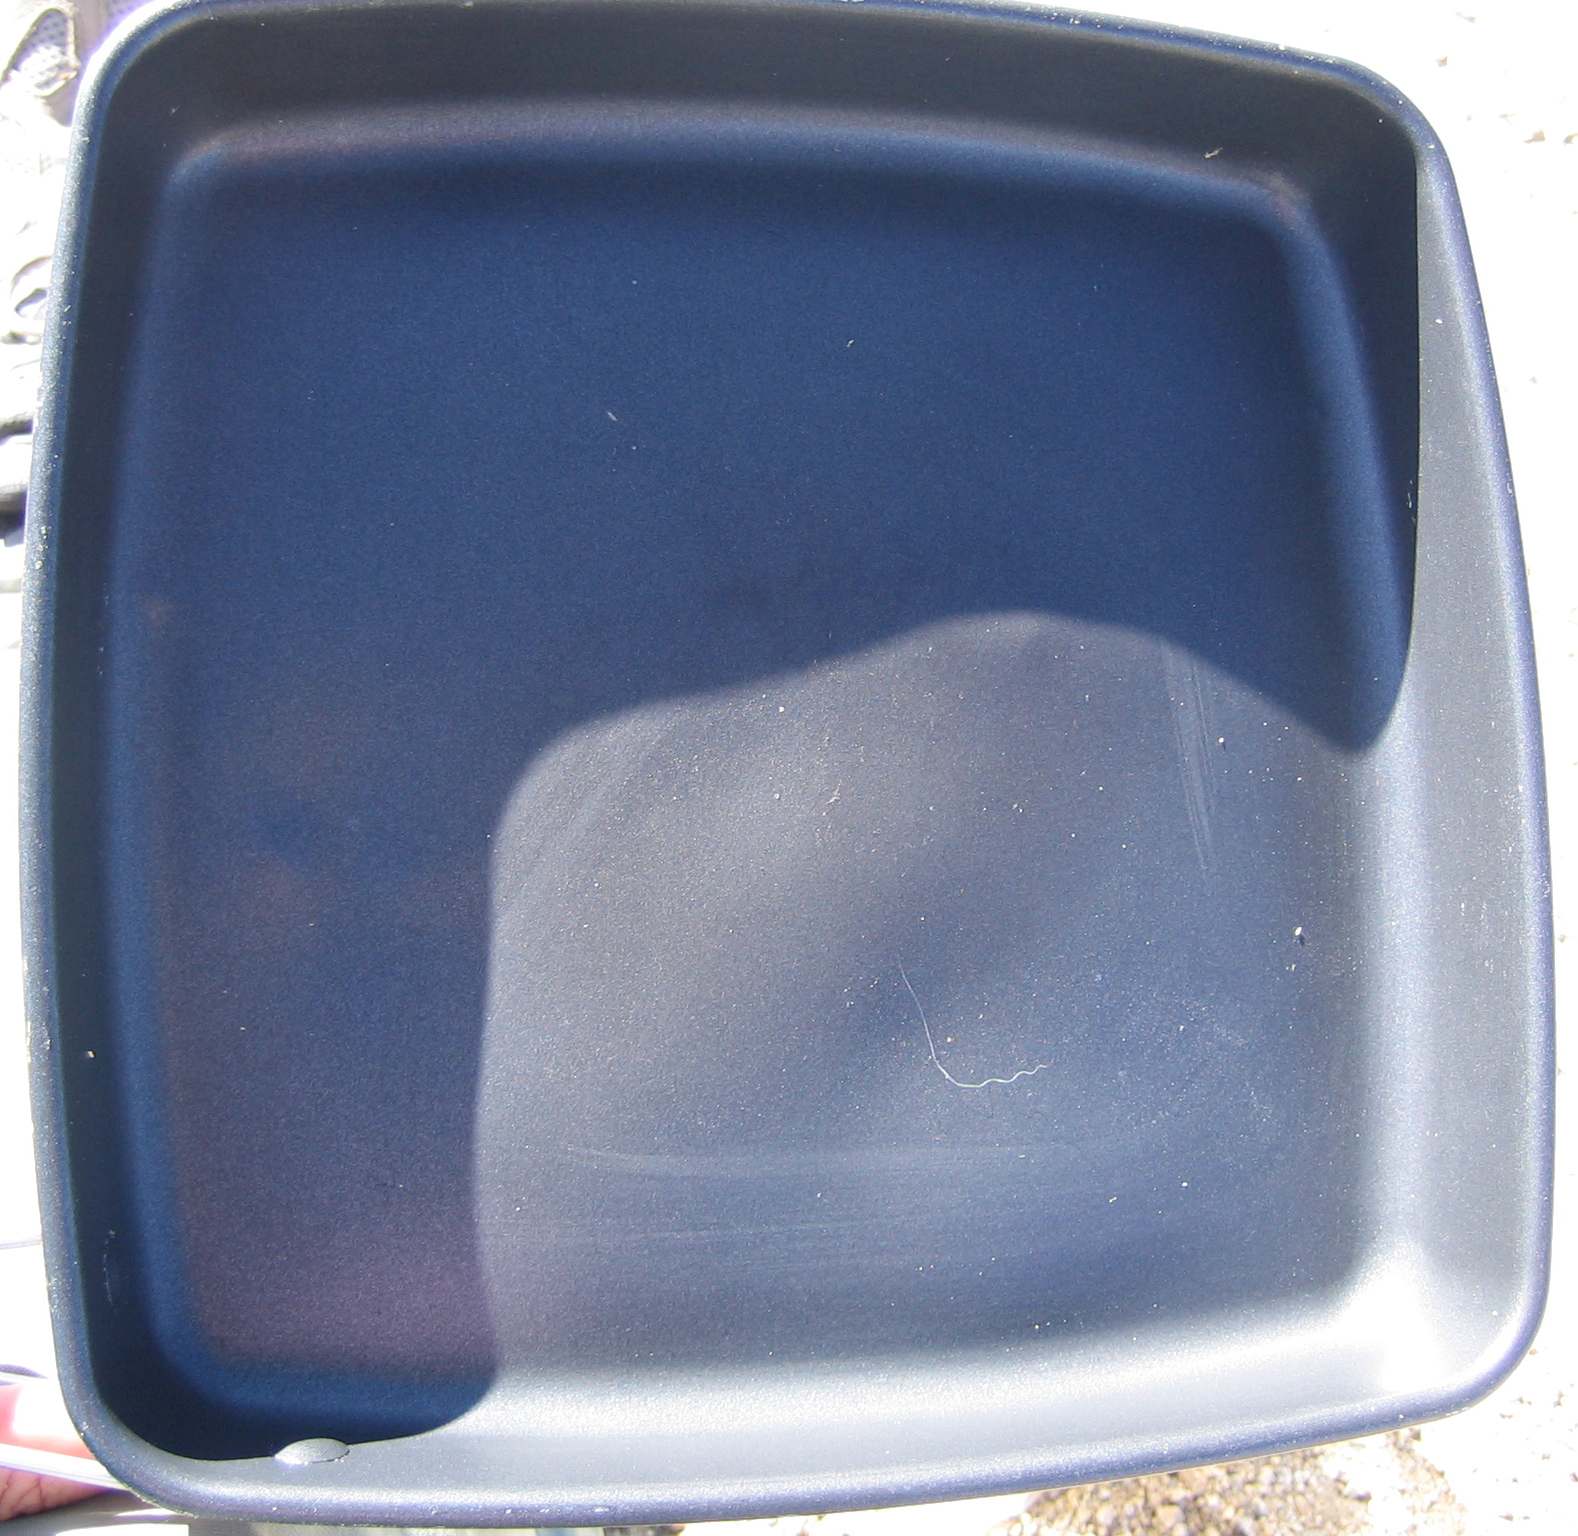 Egg scramble pan after cleaning with Scrubr T